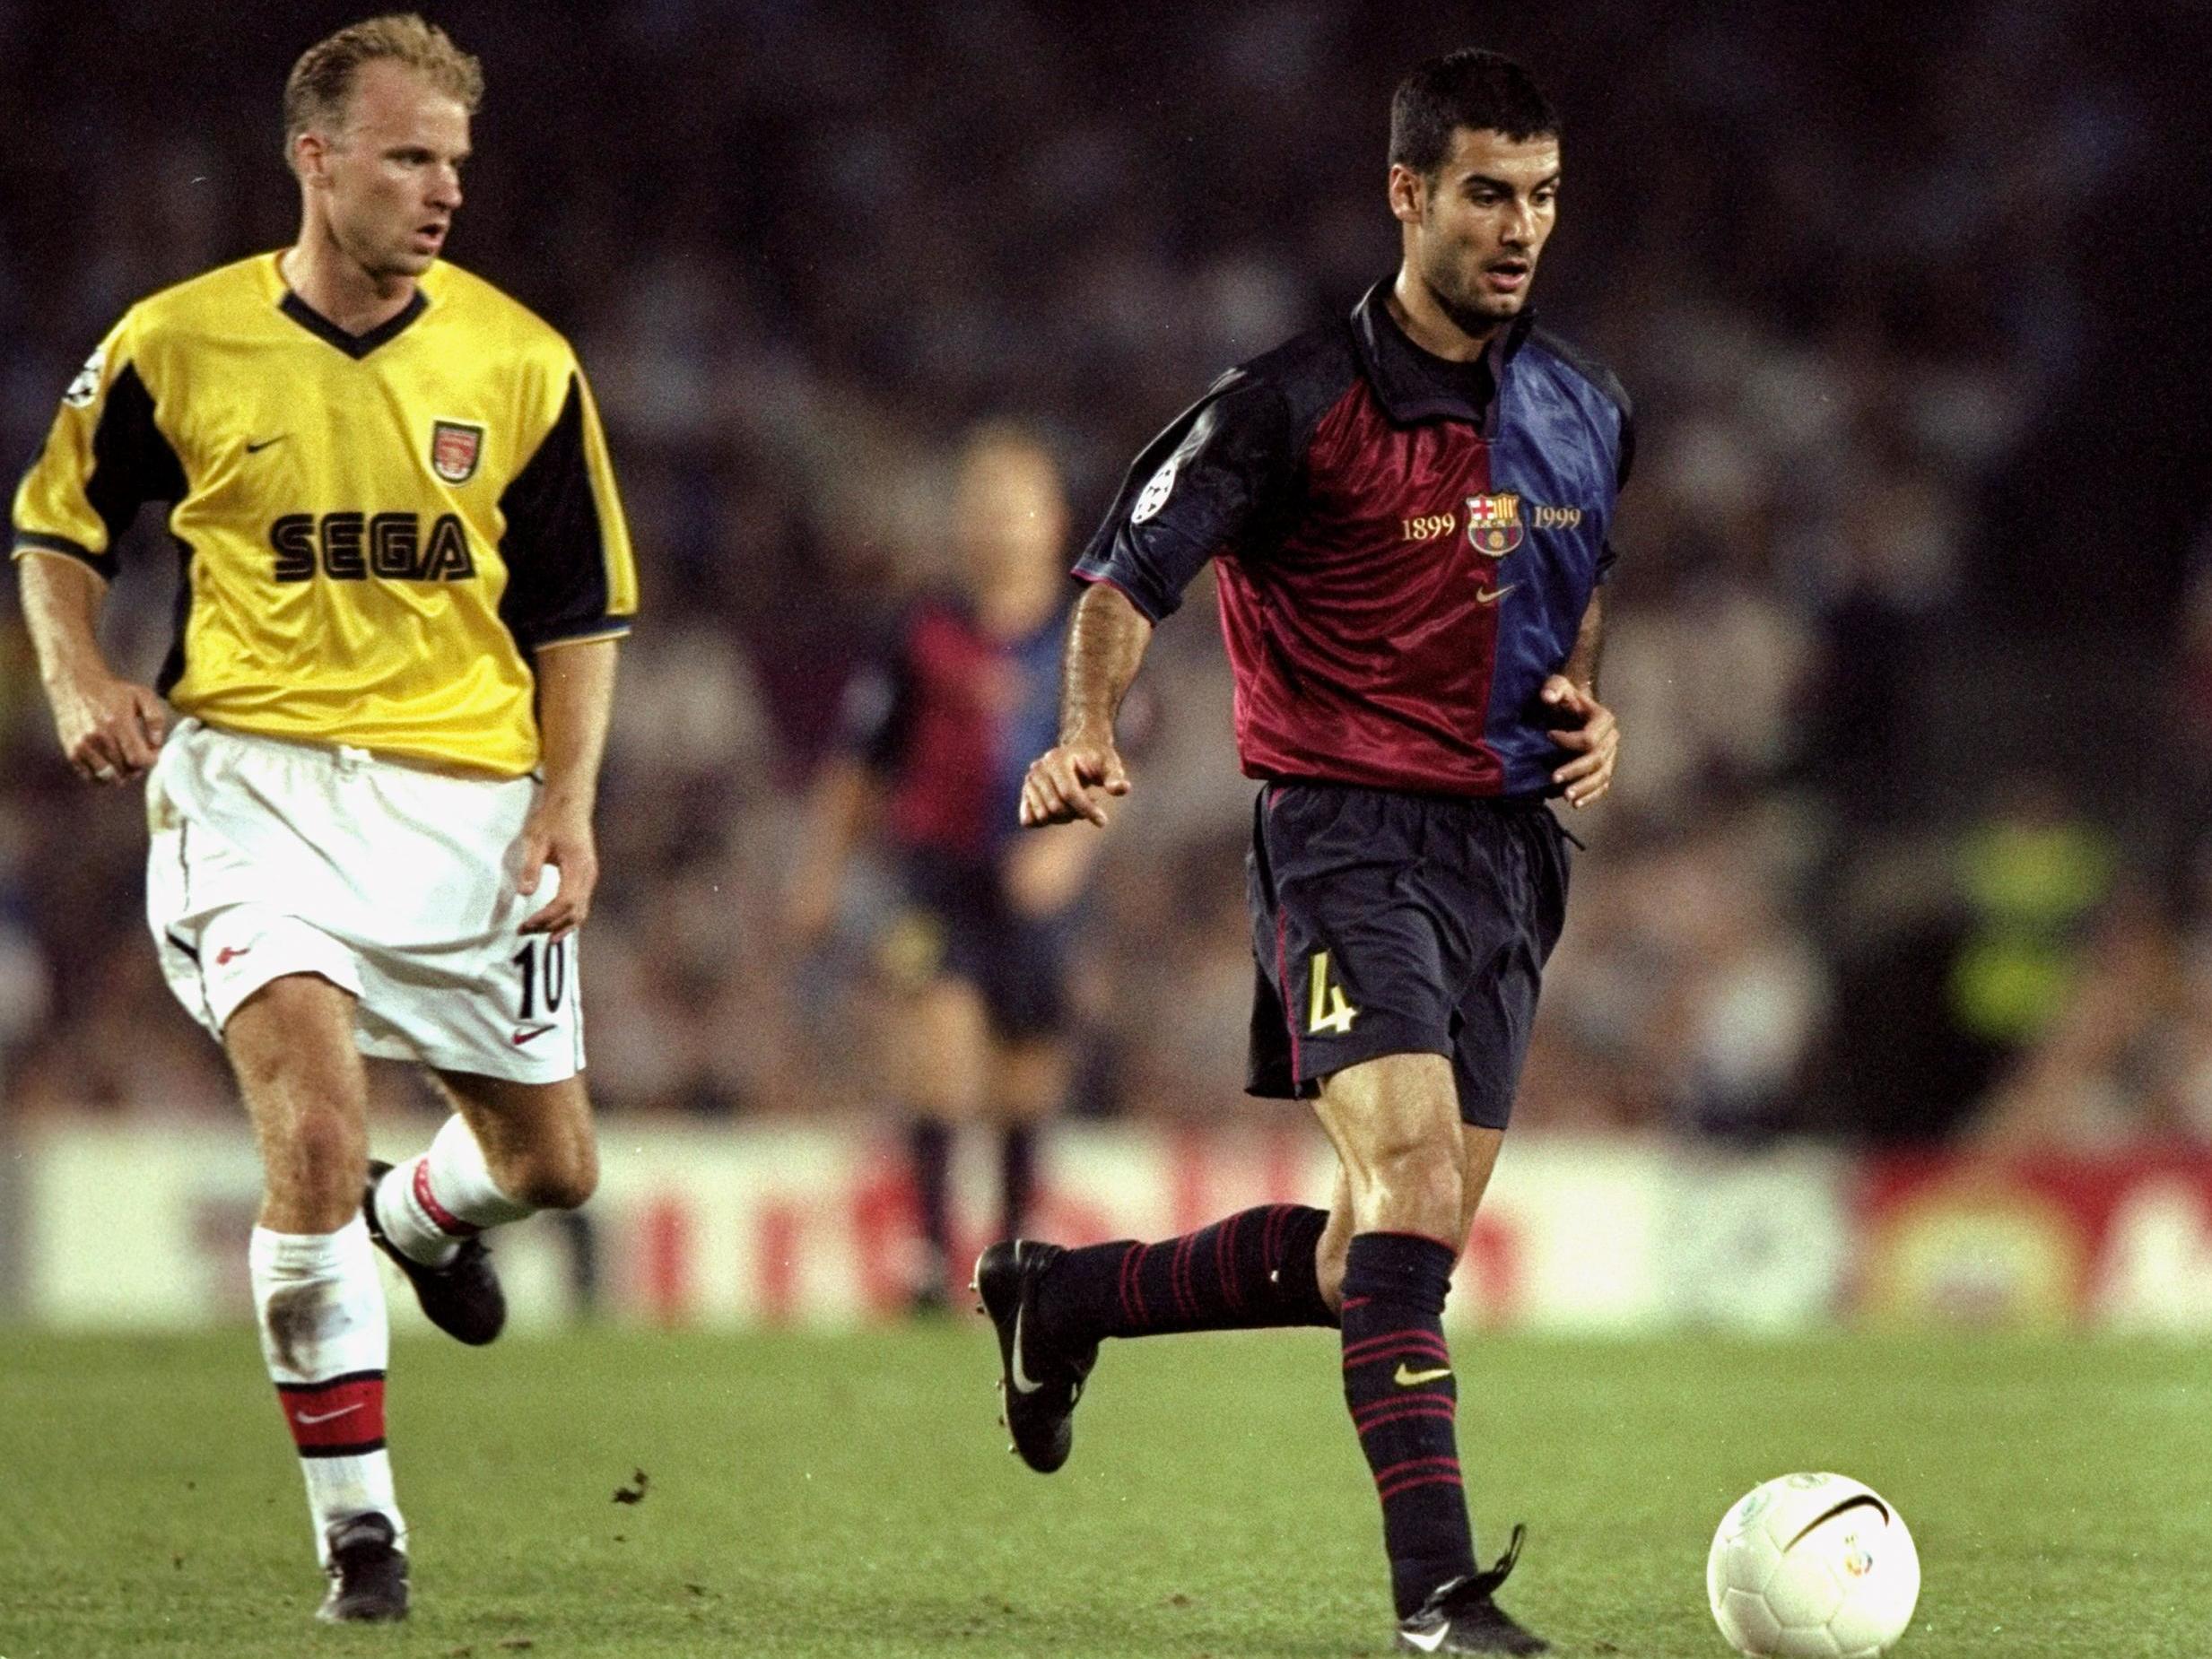 Pep Guardiola in action for Barcelona against Arsenal during the 1999/2000 Champions League campaign